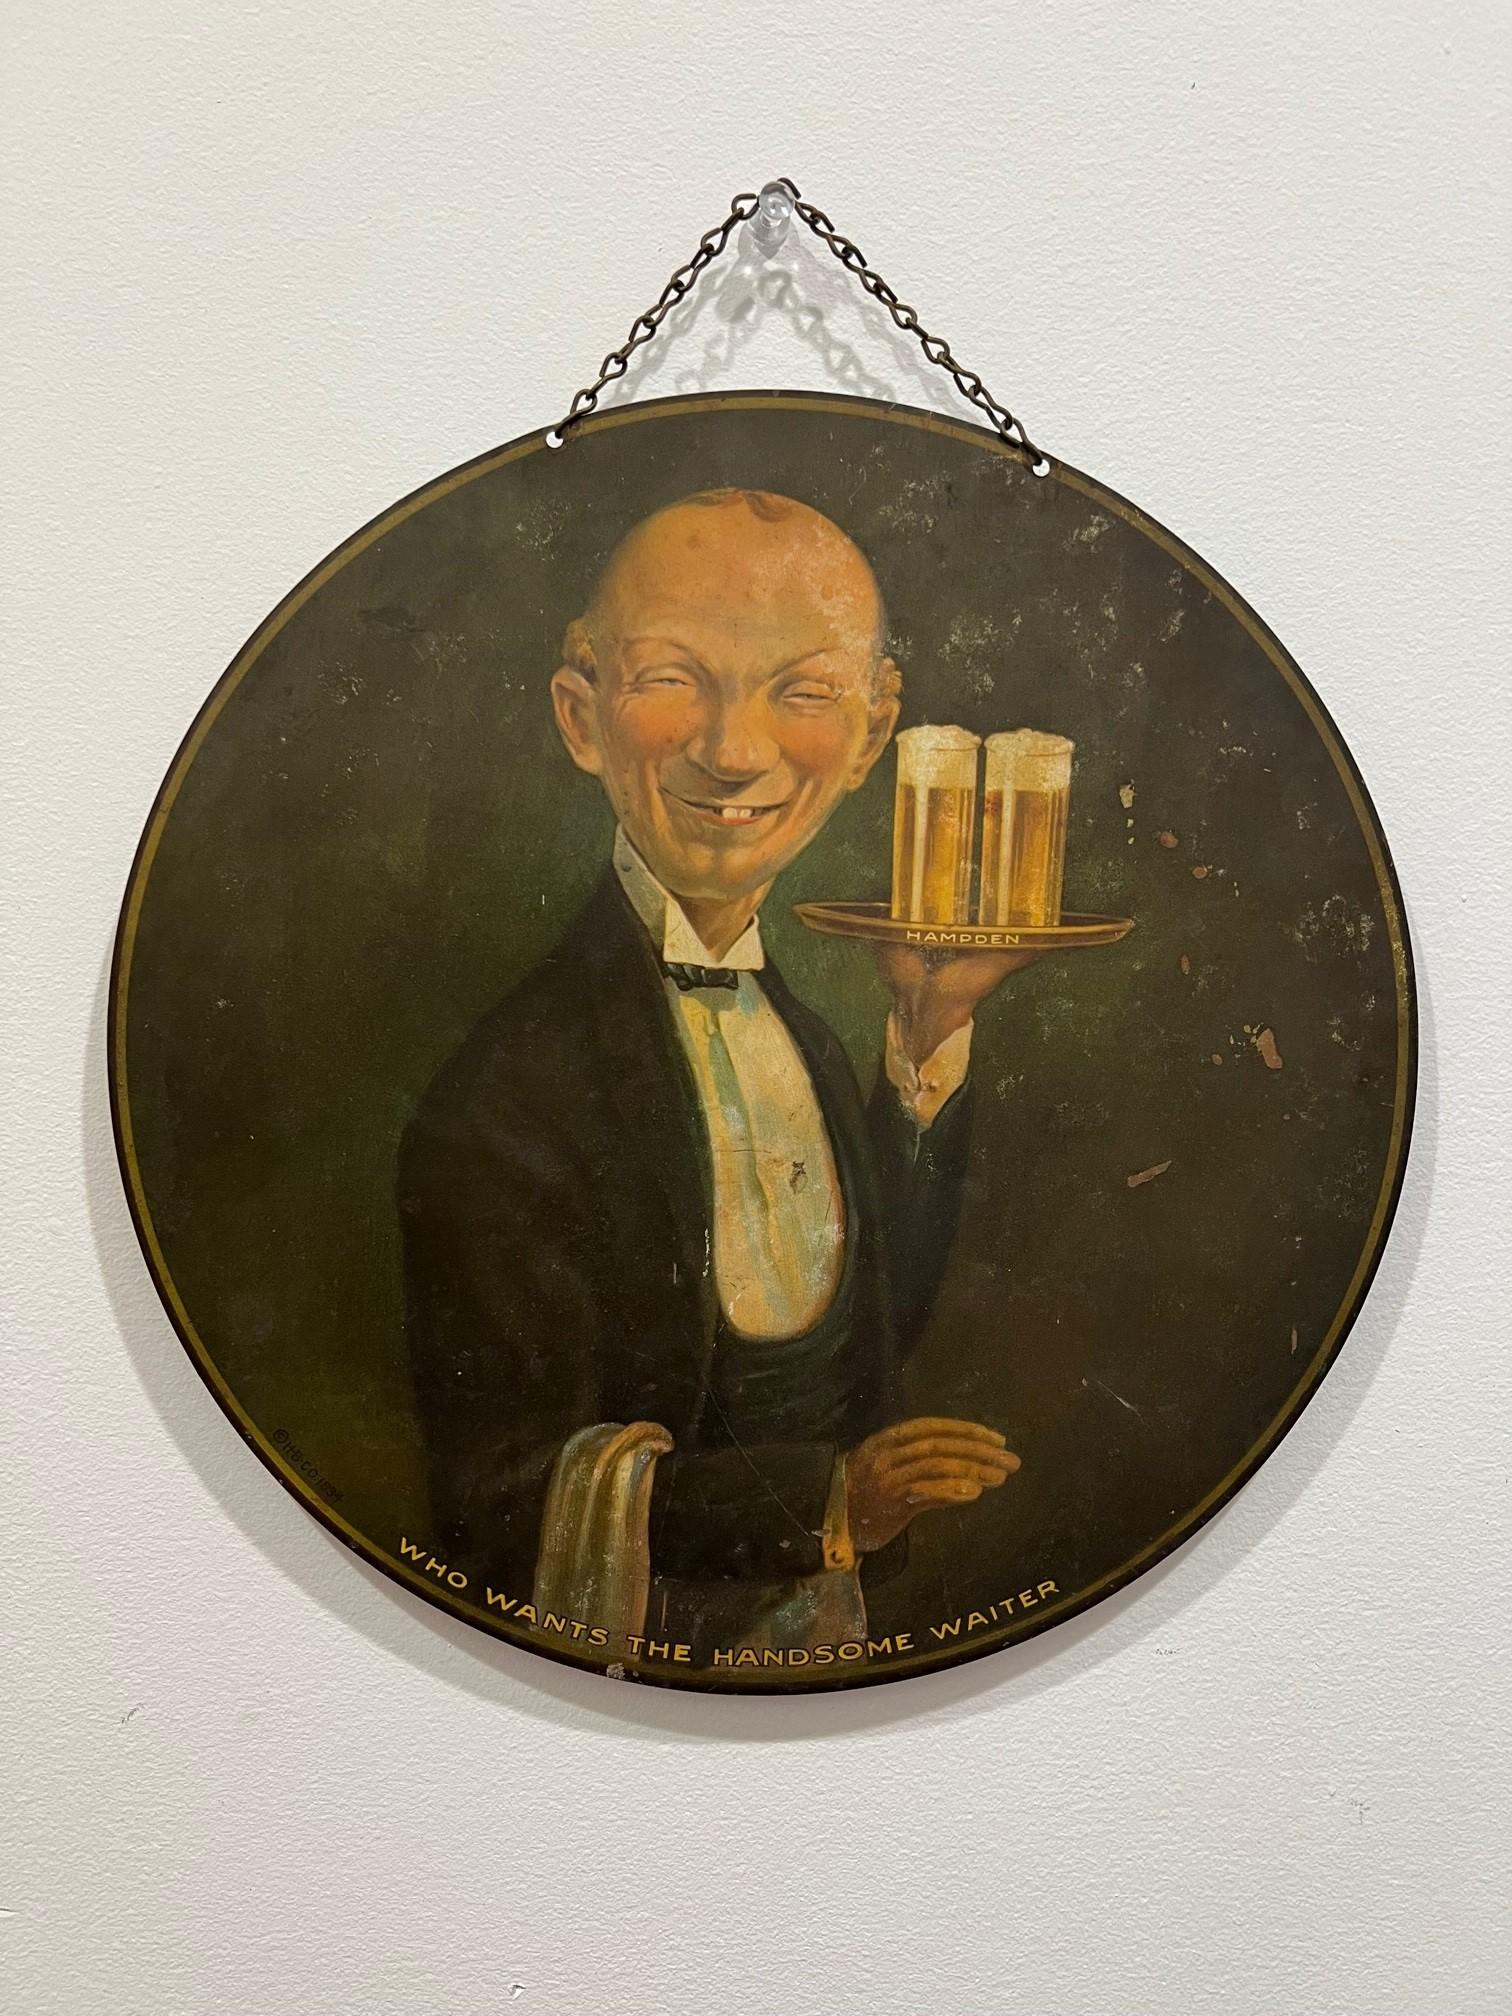 Vintage original early tin litho chain hung advertisement sign for Hampden Brewing Company, featuring the companies goofy looking handsome waiter. The Hampden brewing company Who Wants The Handsome Waiter tin sign is in good condition with minor